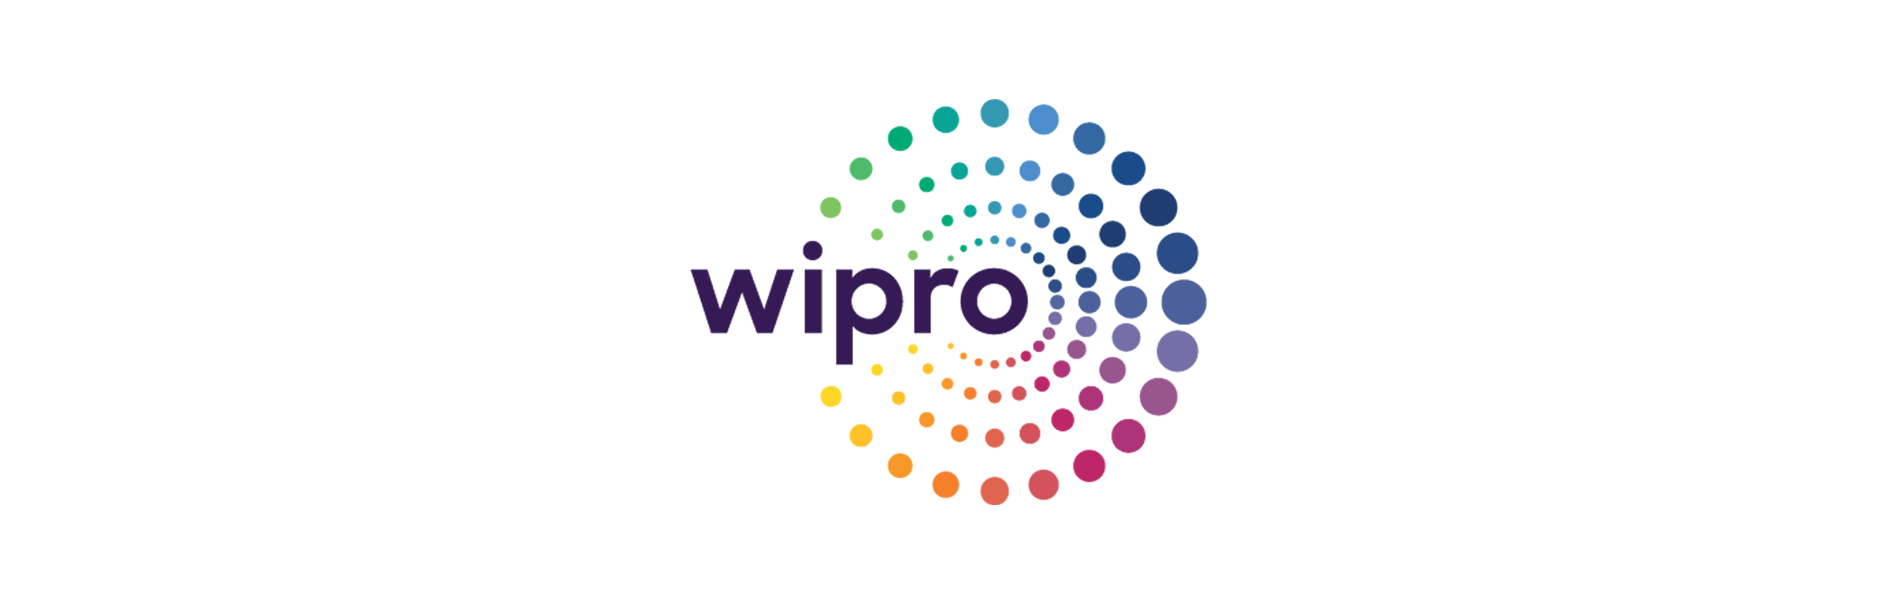 HM Treasury Selects Wipro for Service Integration and Management